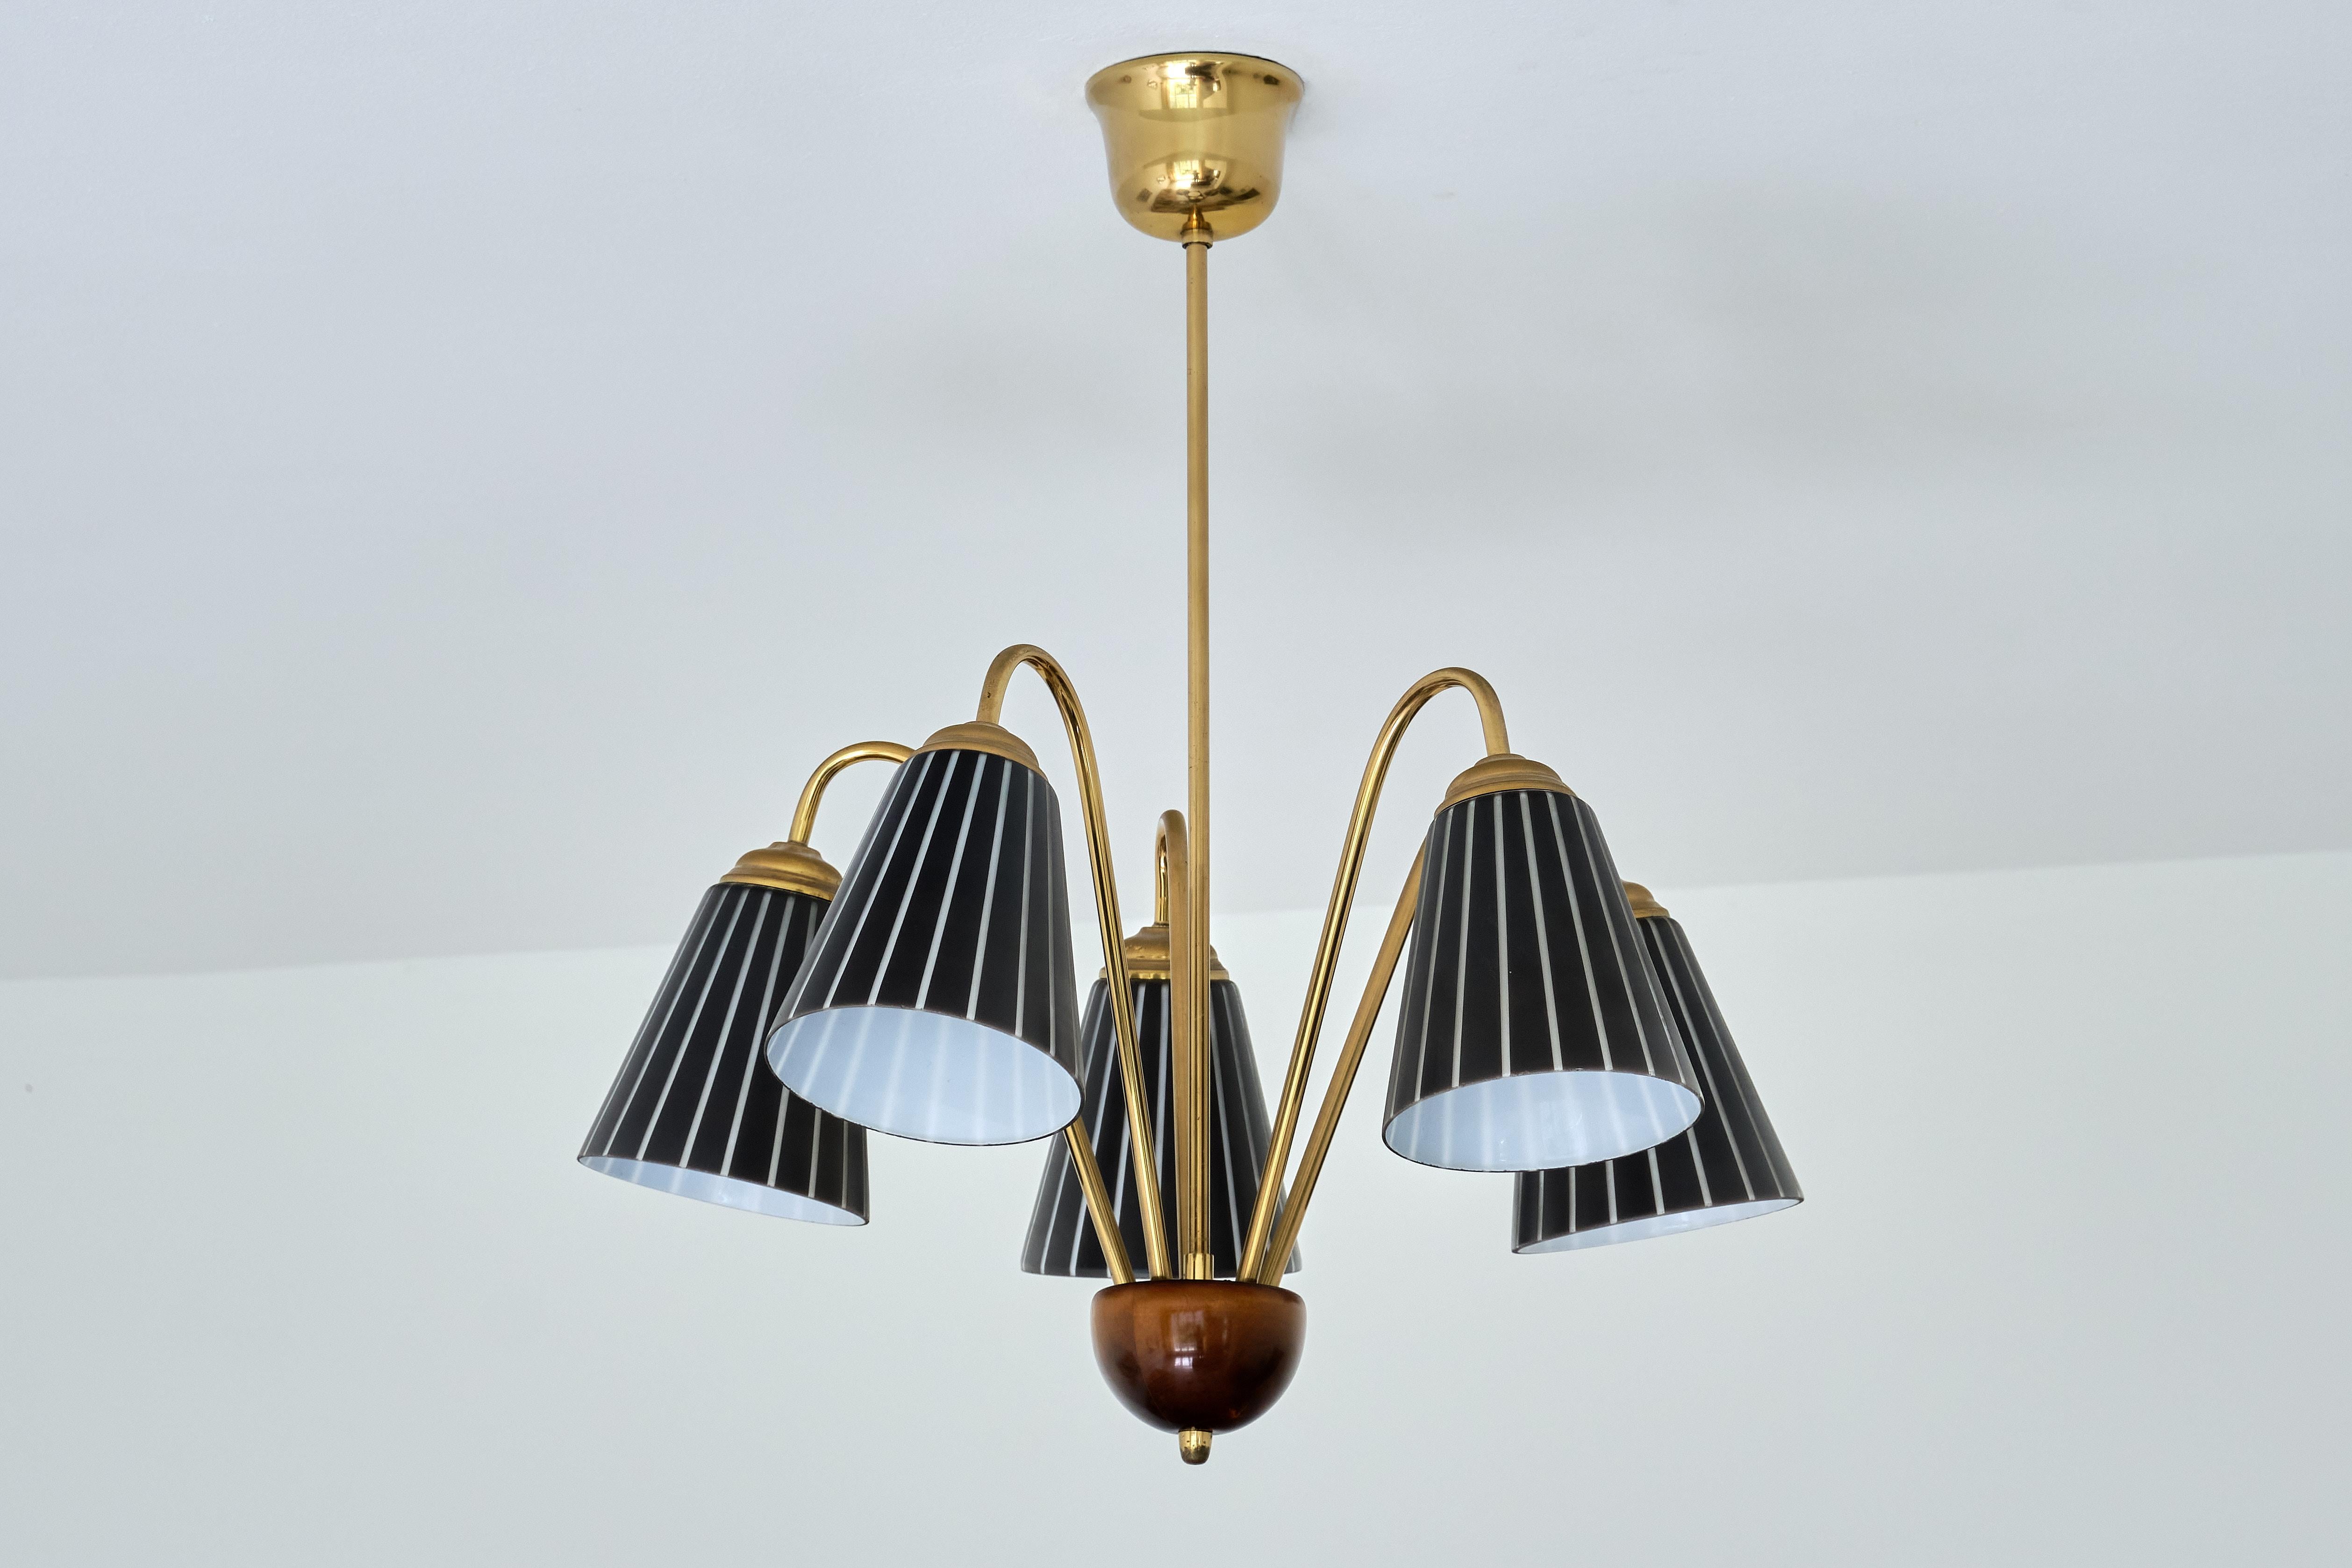 This rare chandelier was produced by the glass company Orrefors in Sweden in the late 1940s. The design is attributed to Nils Landberg, a designer who has created similar striped glass shades for the company.

The striking design consists of a